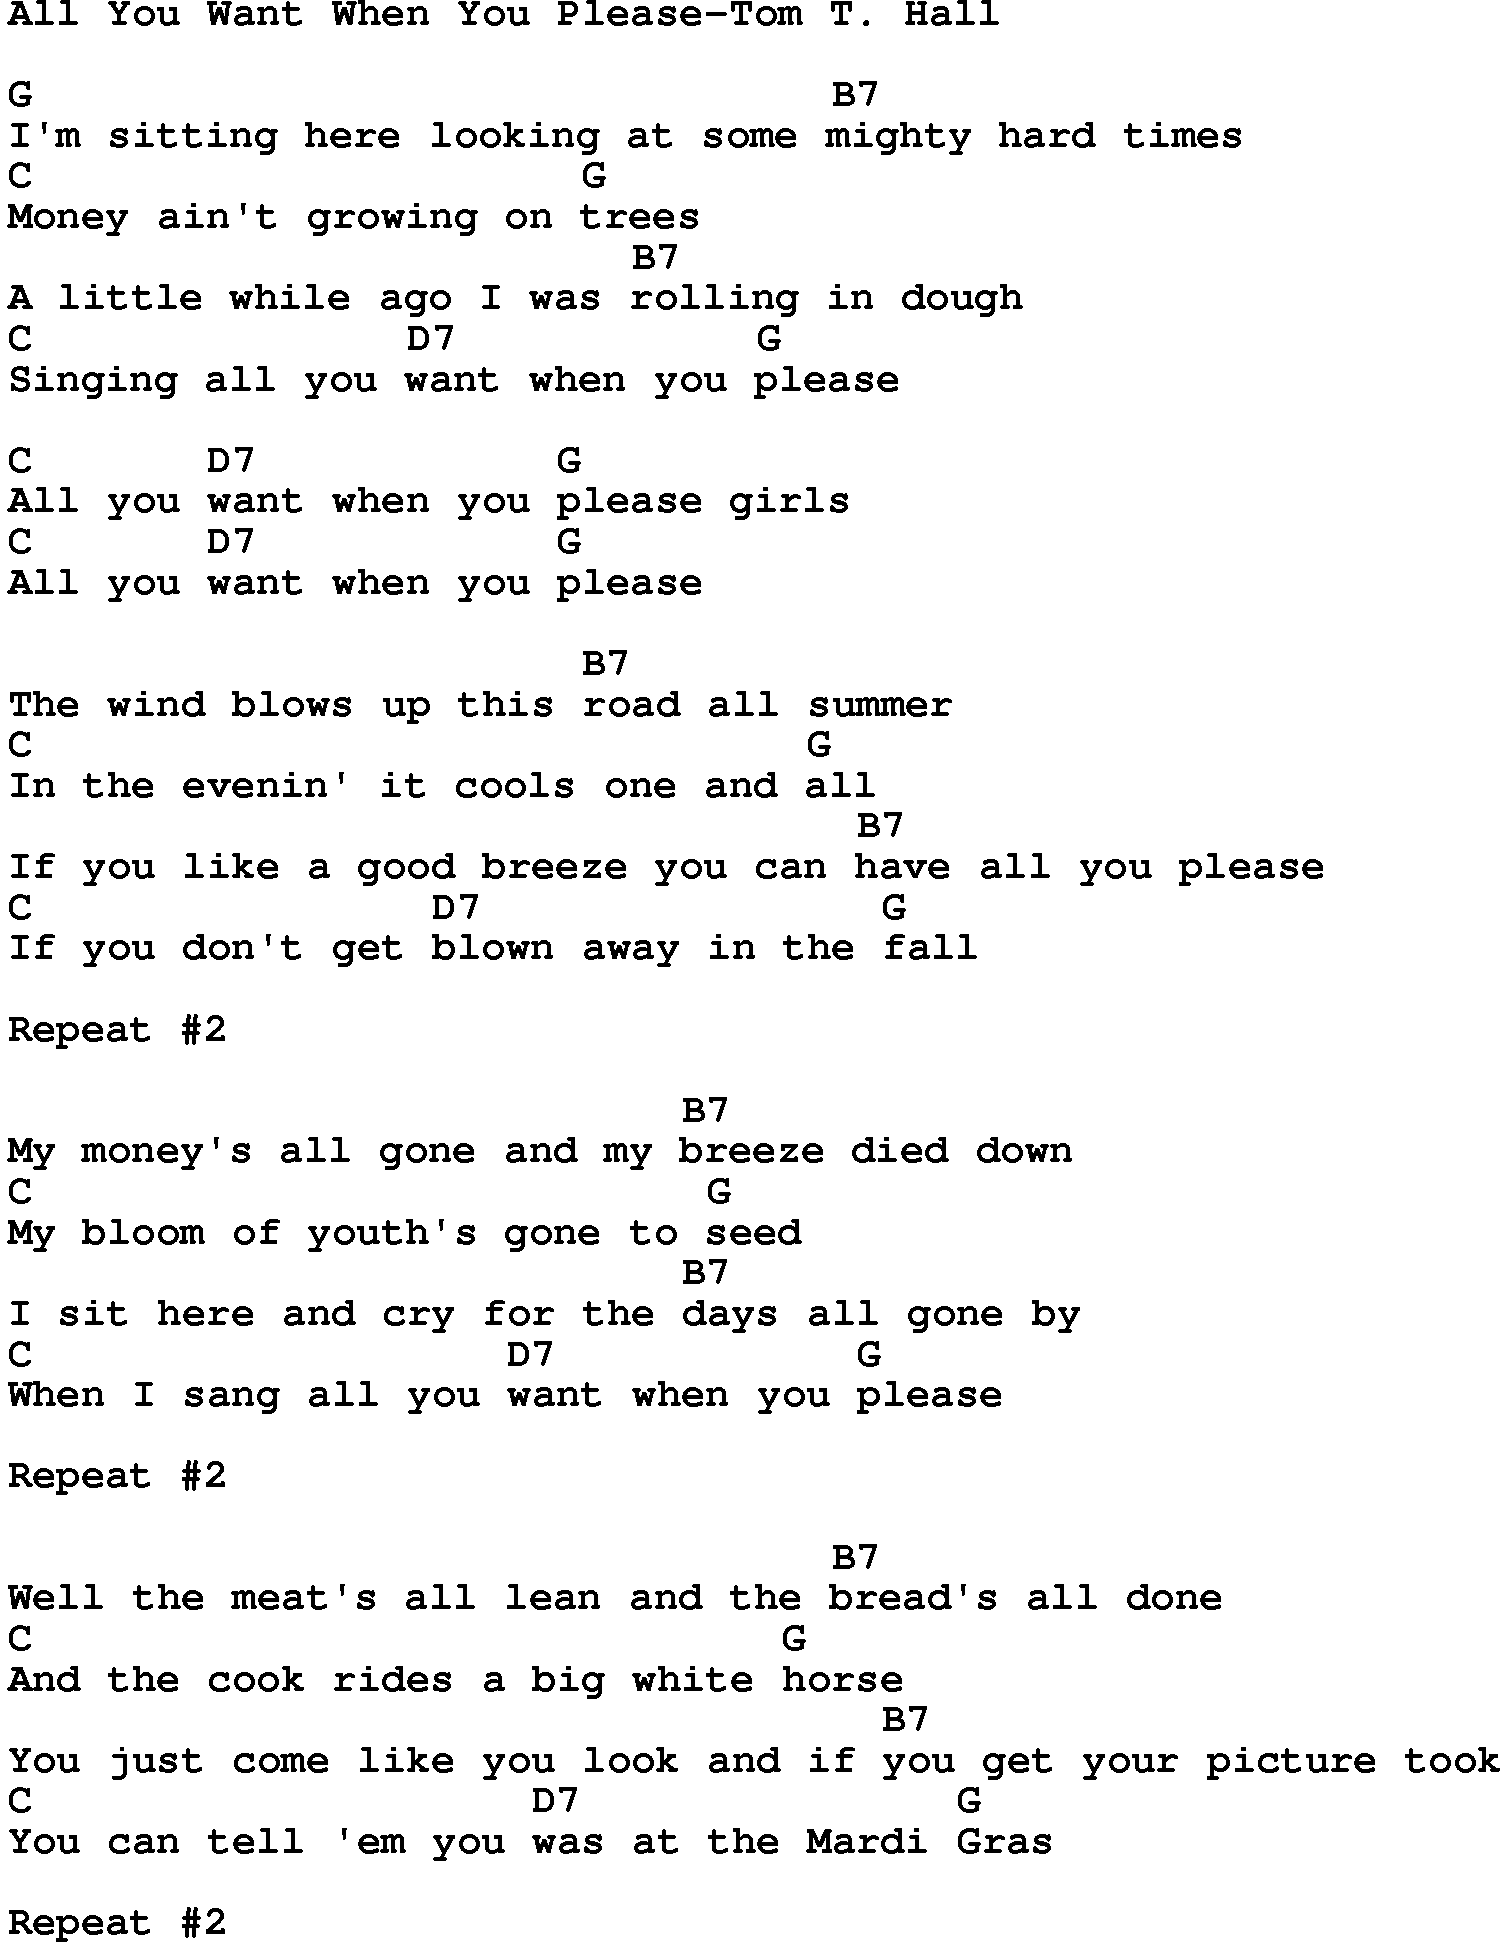 Country music song: All You Want When You Please-Tom T Hall lyrics and chords